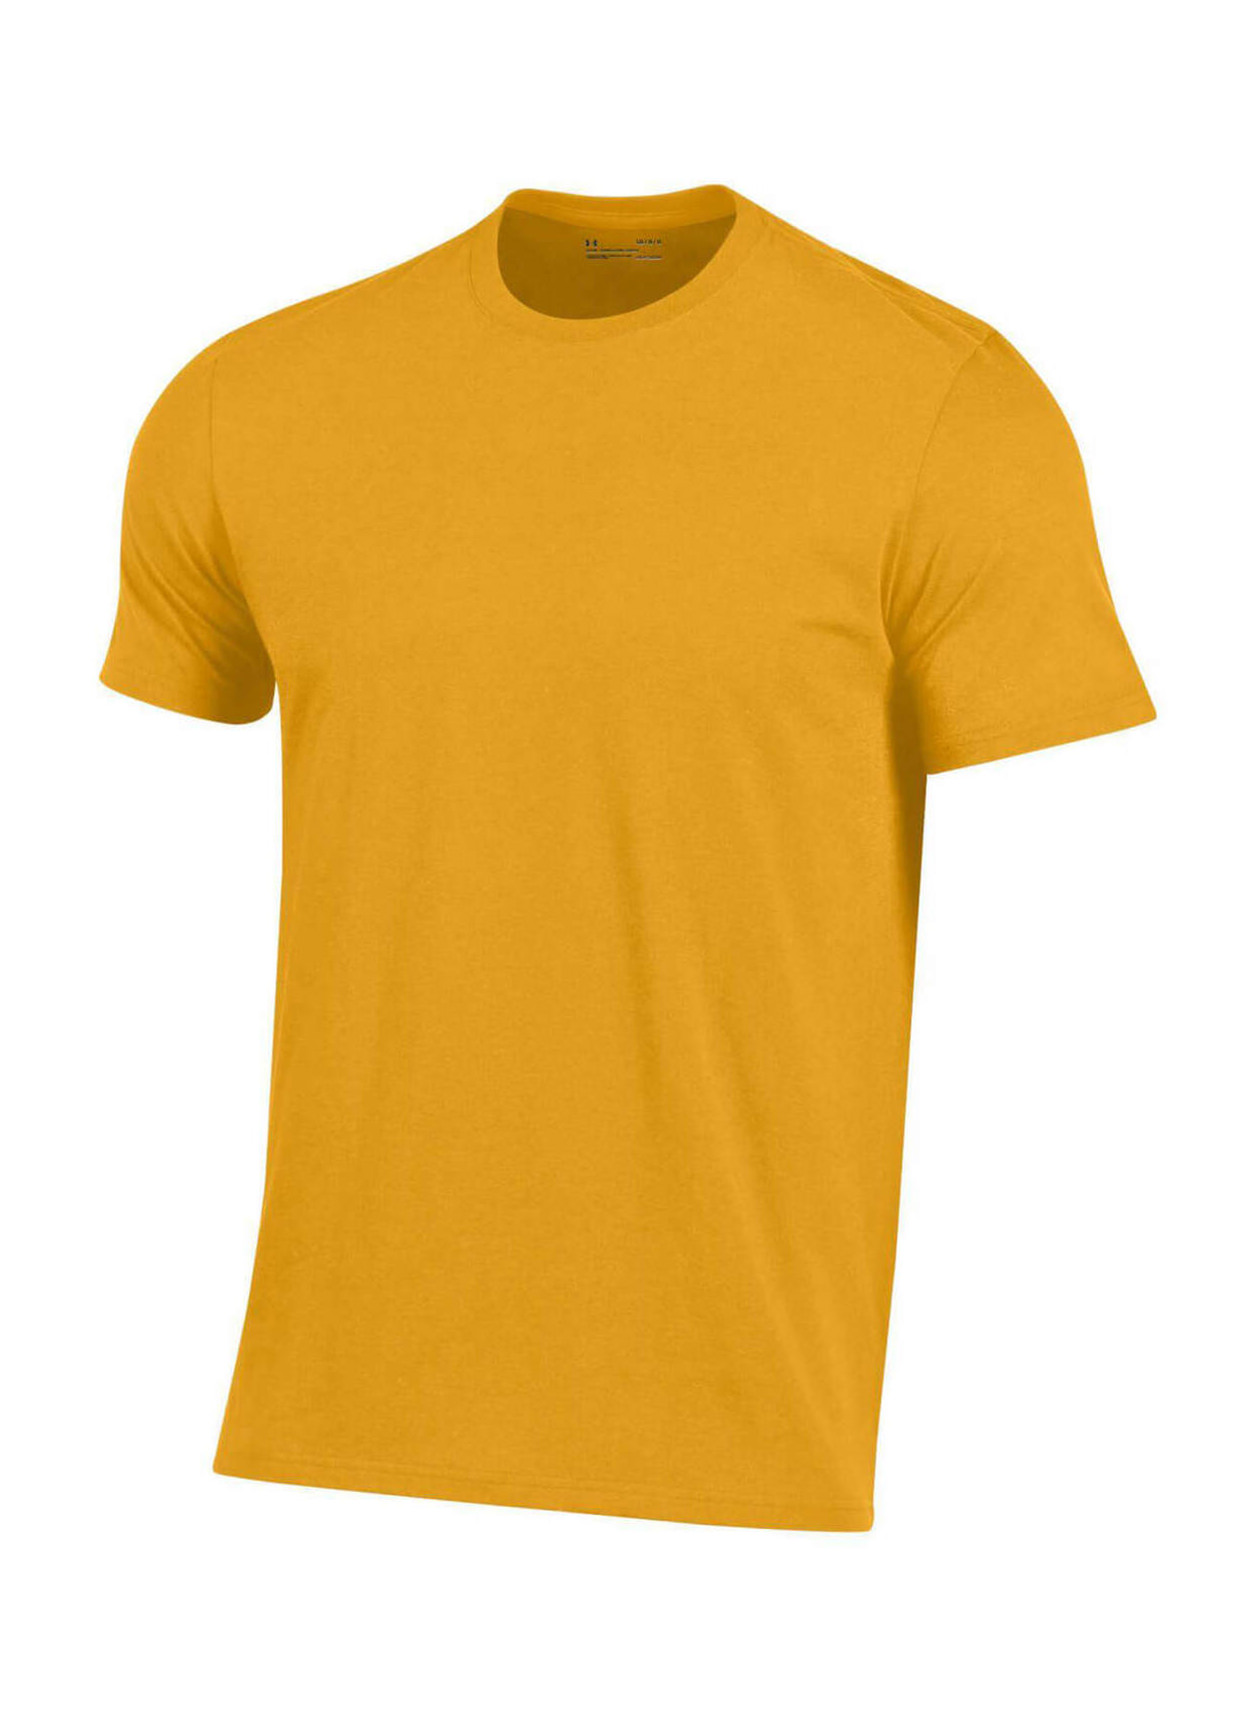 Screen Printed T-shirts  Under Armour Men's Steeltown Gold Performance  Cotton T-Shirt